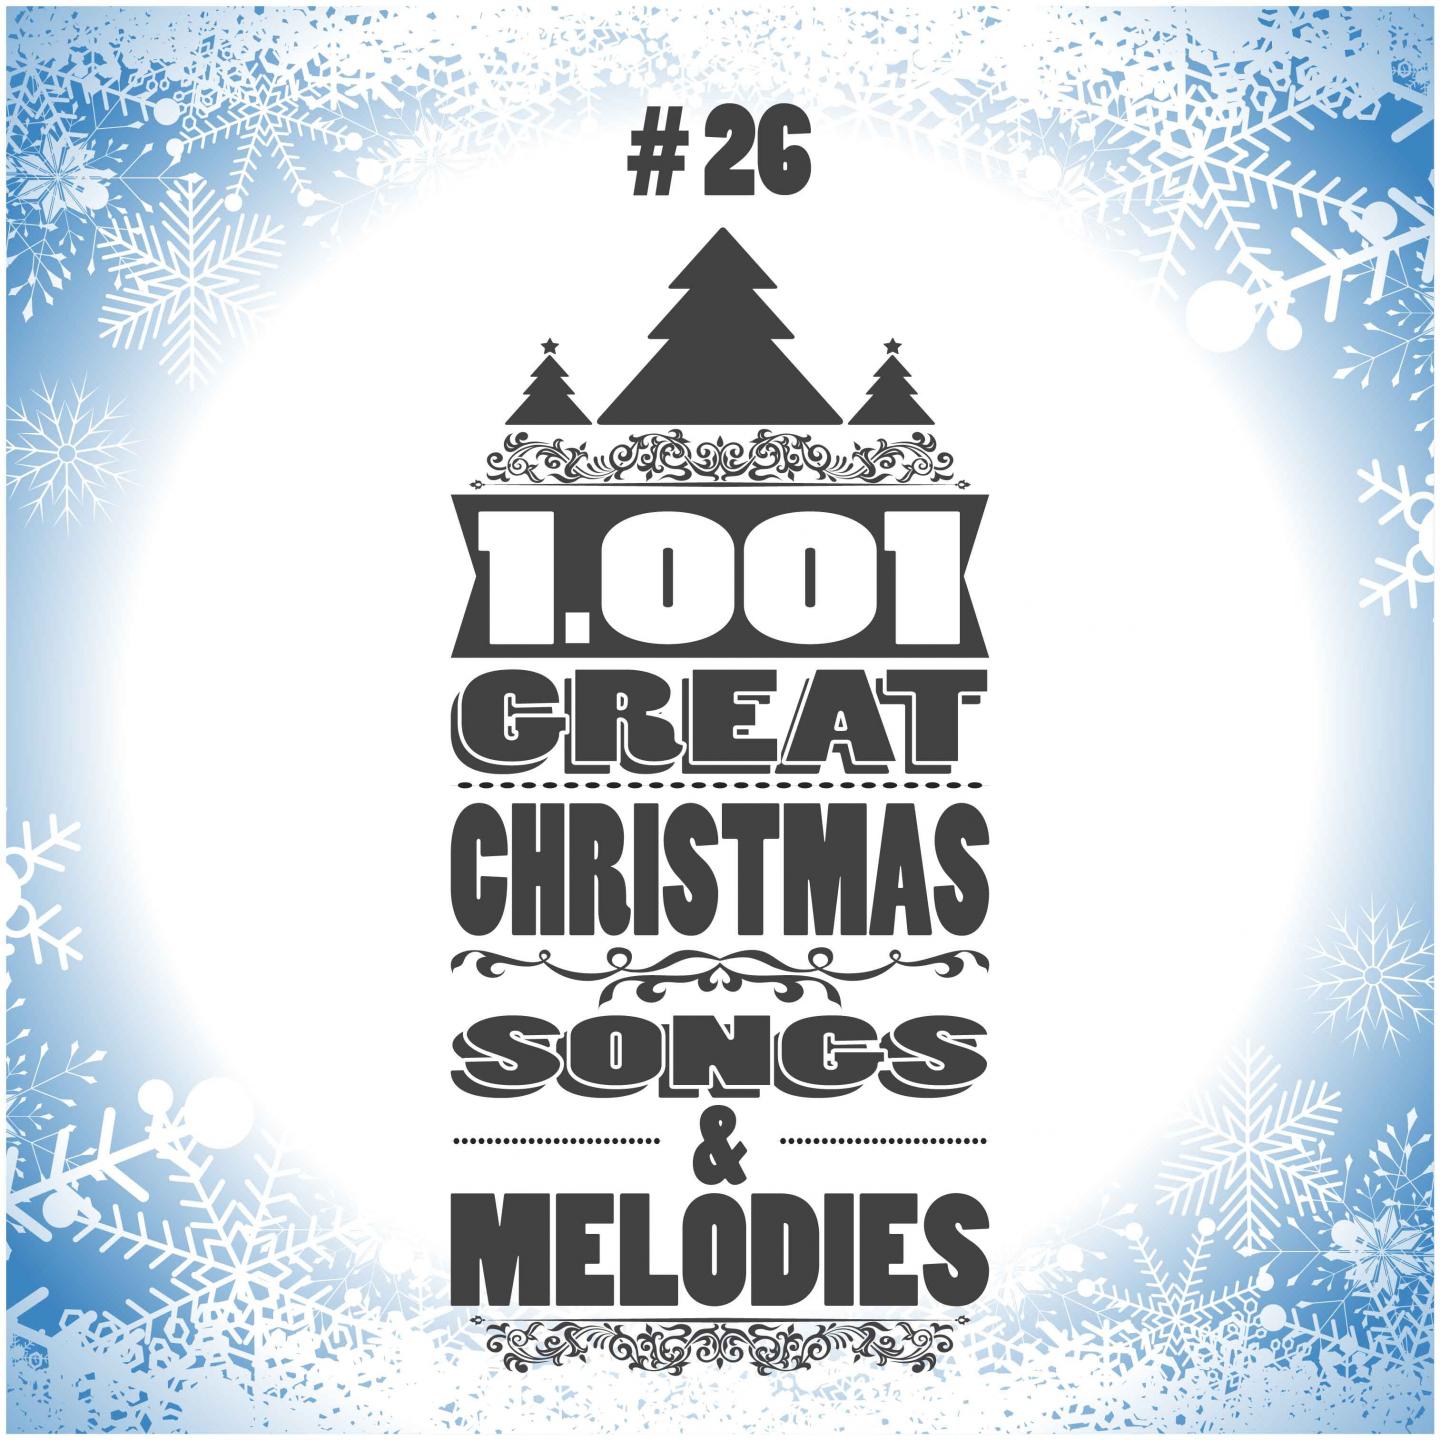 1001 Great Christmas Songs & Melodies, Vol. 26